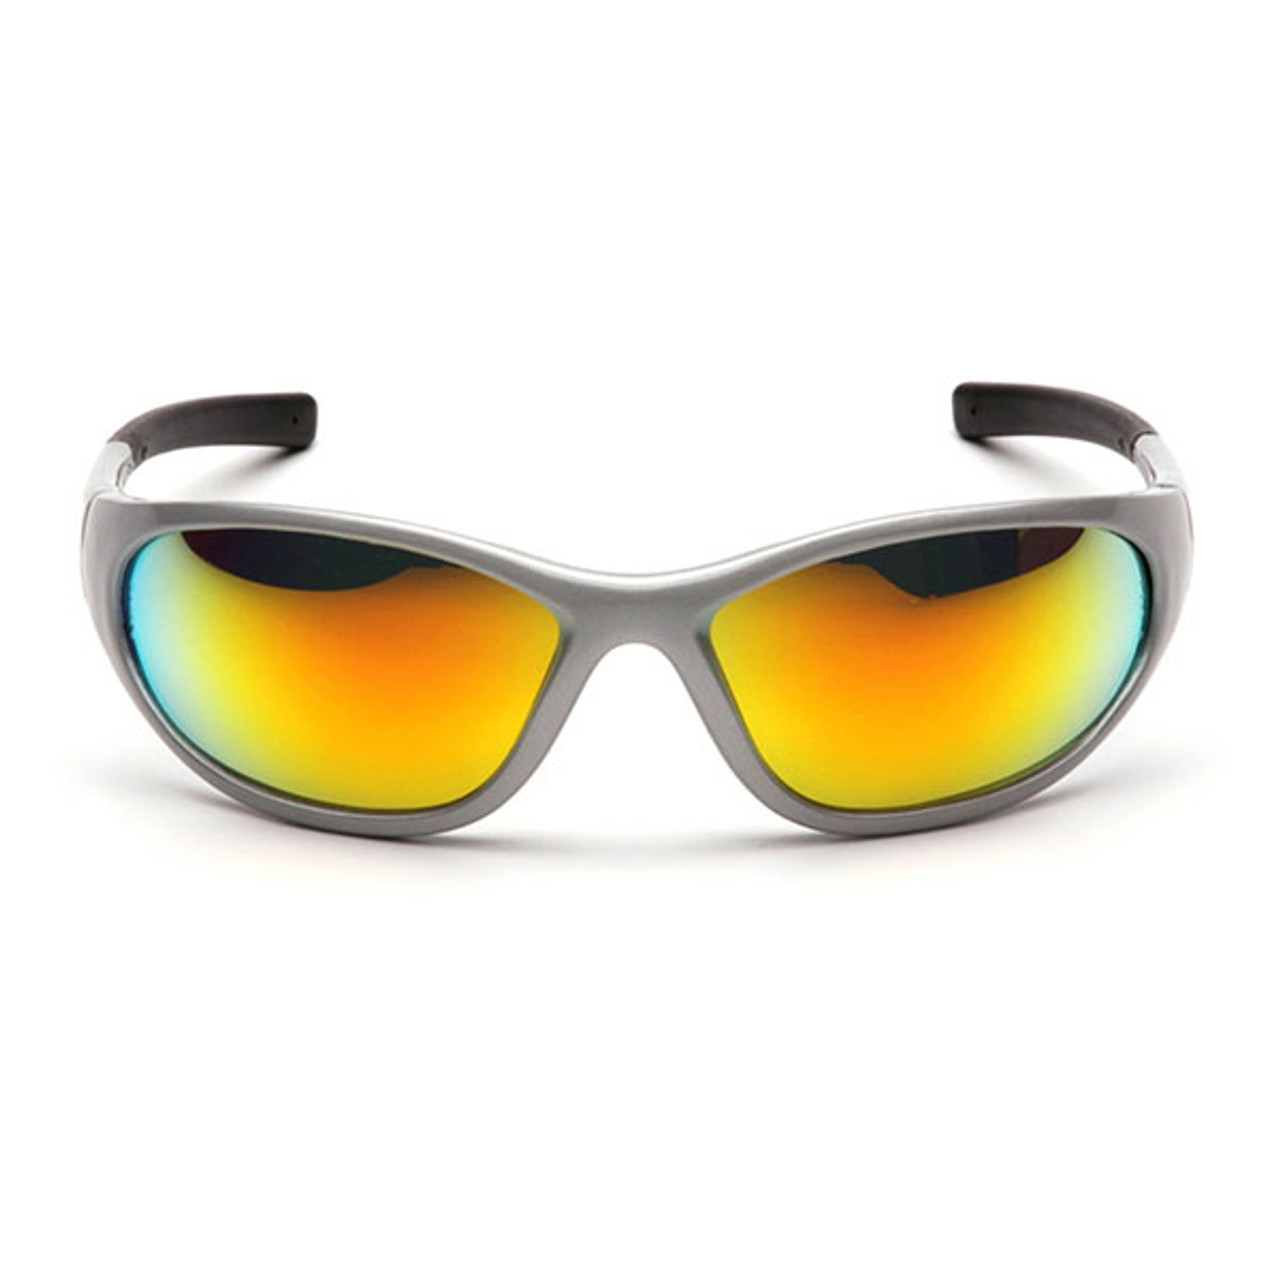 Pyramex® Zone II Safety Glasses — Silver Frame with Ice Orange Mirror Lens